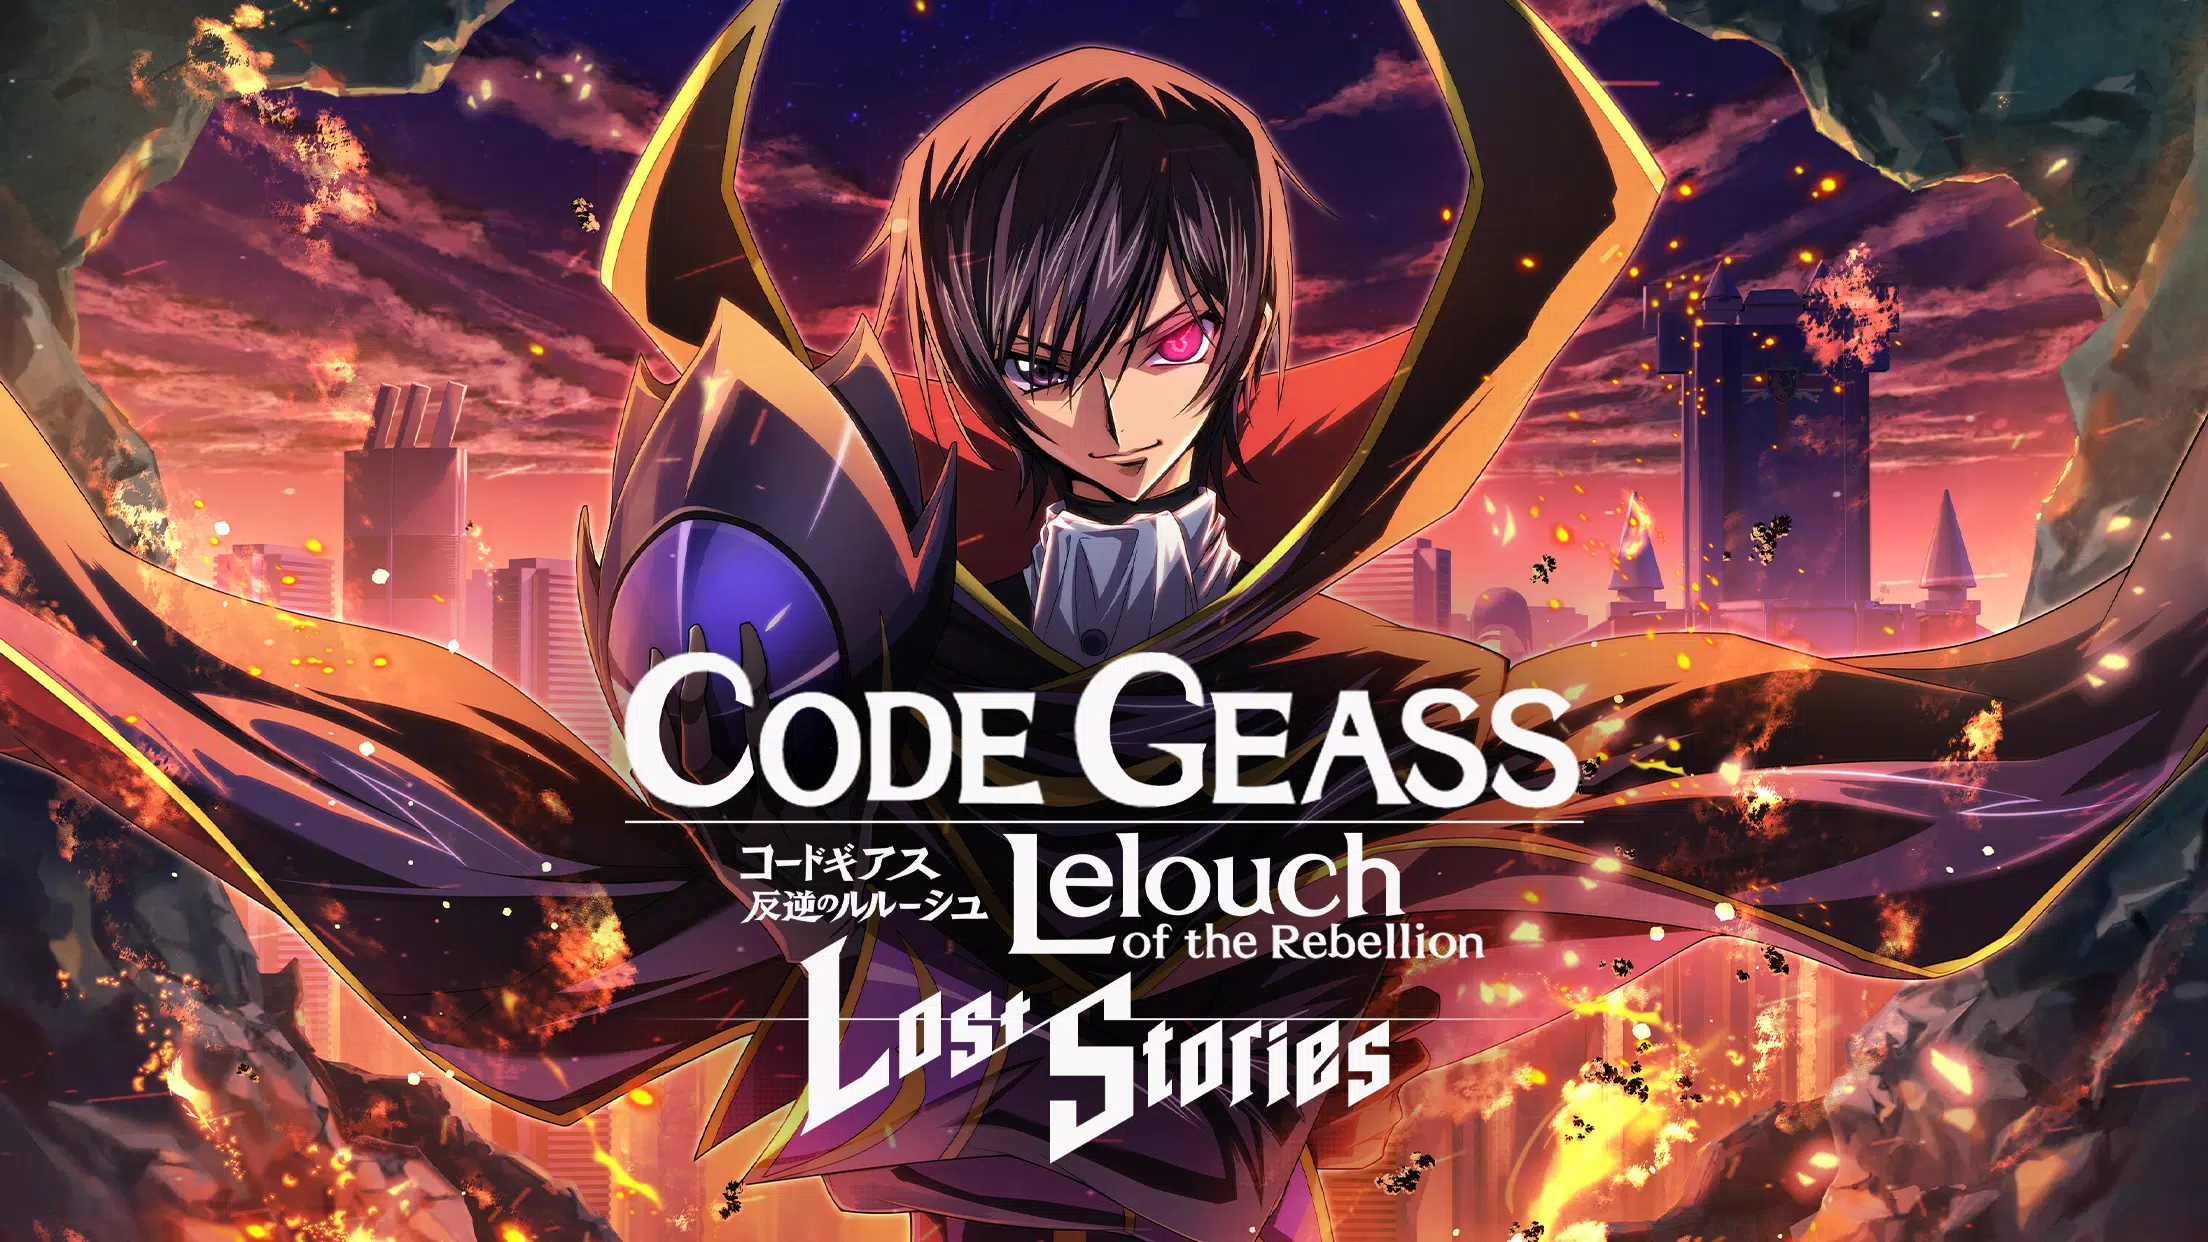 Icons de Personagens Todo Dia on X: Icons do Lelouch Anime: Code Geass:  Lelouch of the Rebellion  / X